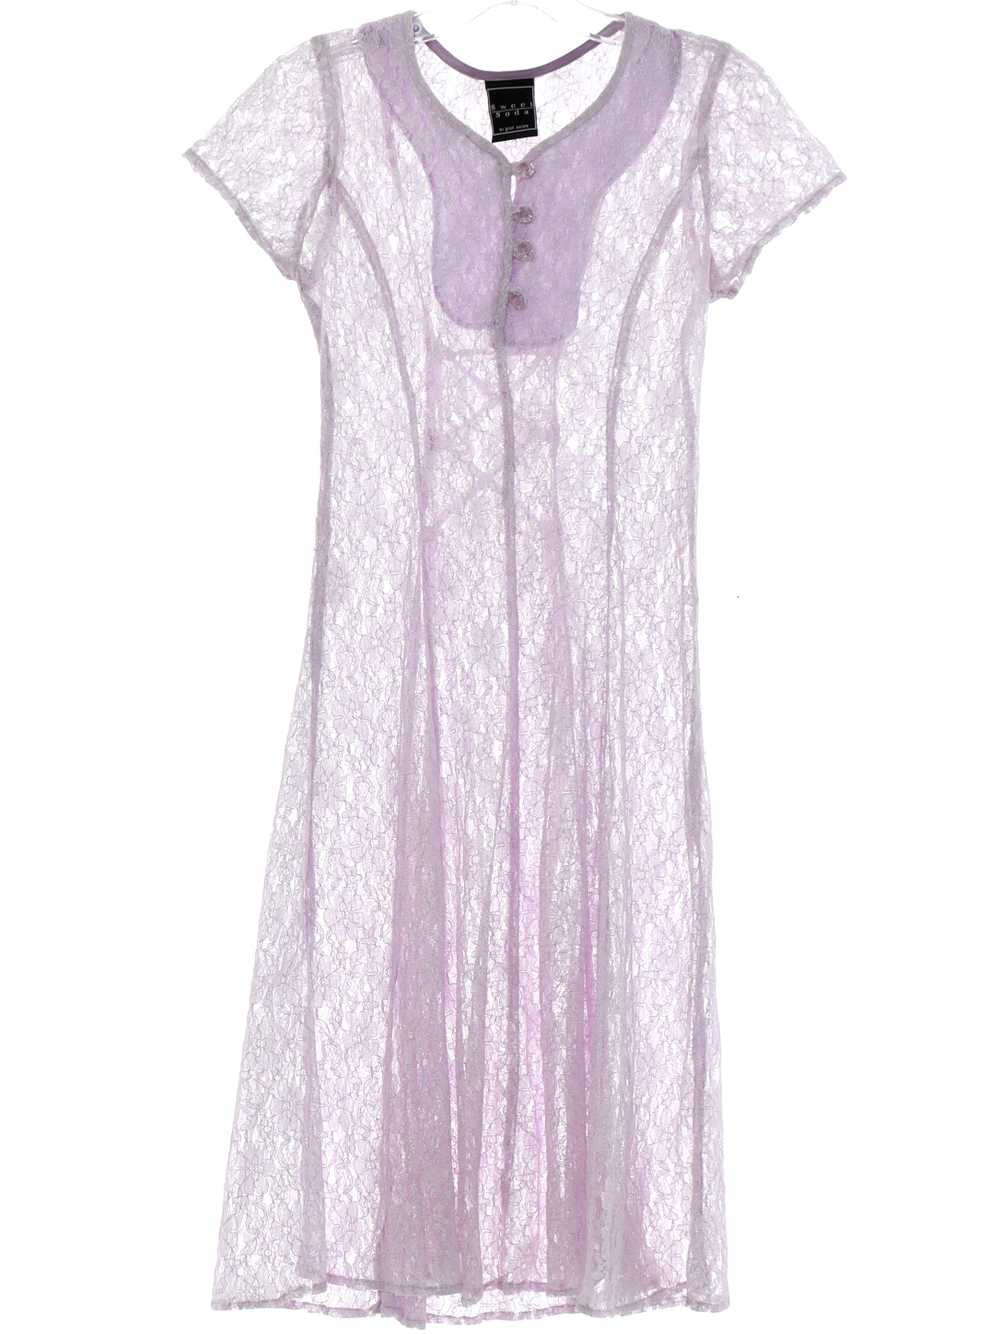 1990's Sweet Soda or Girls Lace Over Dress - image 1